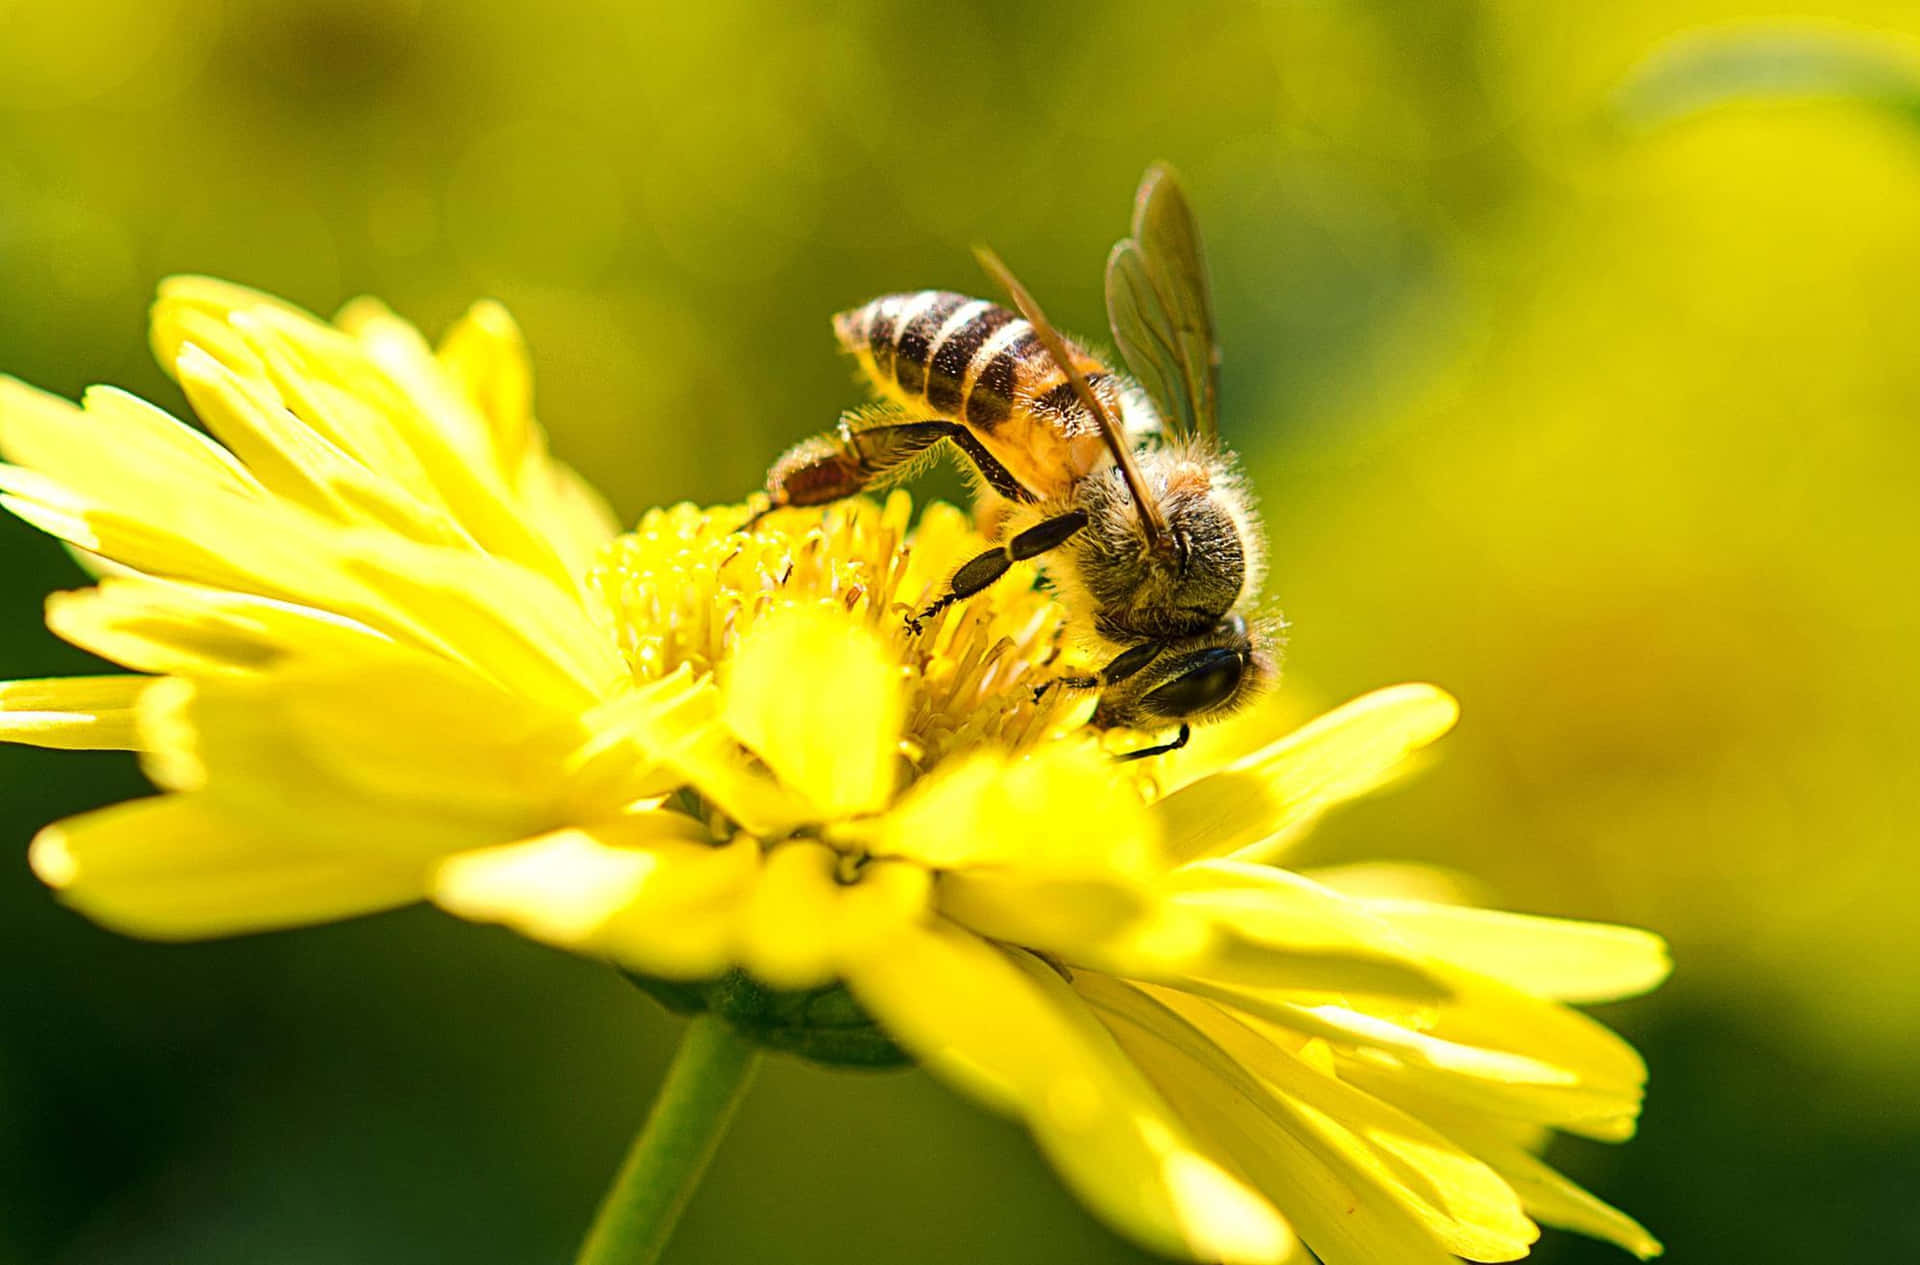 The wonder of nature – a close-up of a global worker, the Honey Bee.